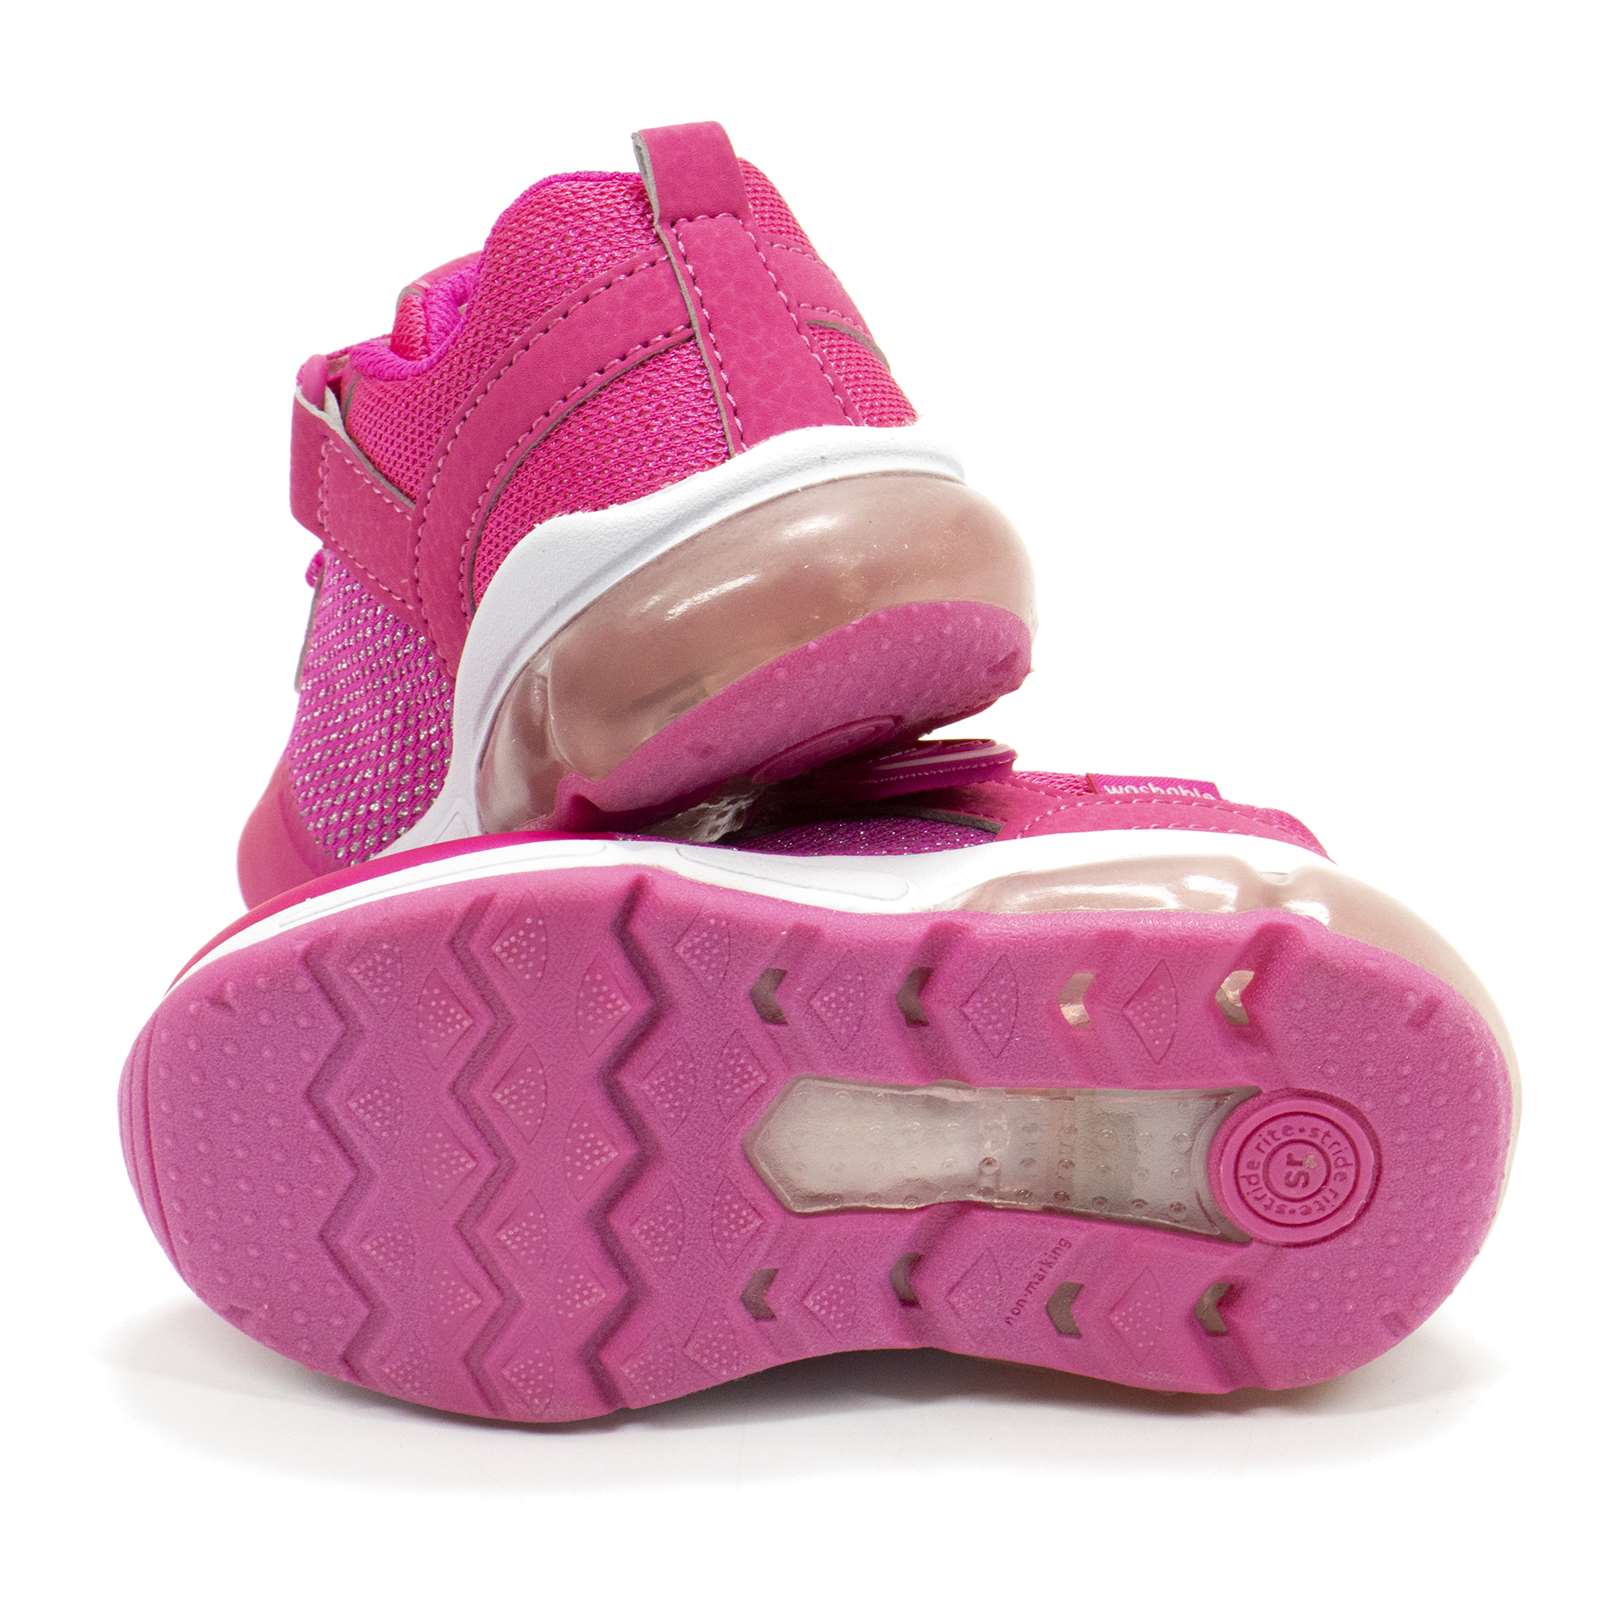 Stride Rite Toddler Made2play Radiant Bounce Sneakers